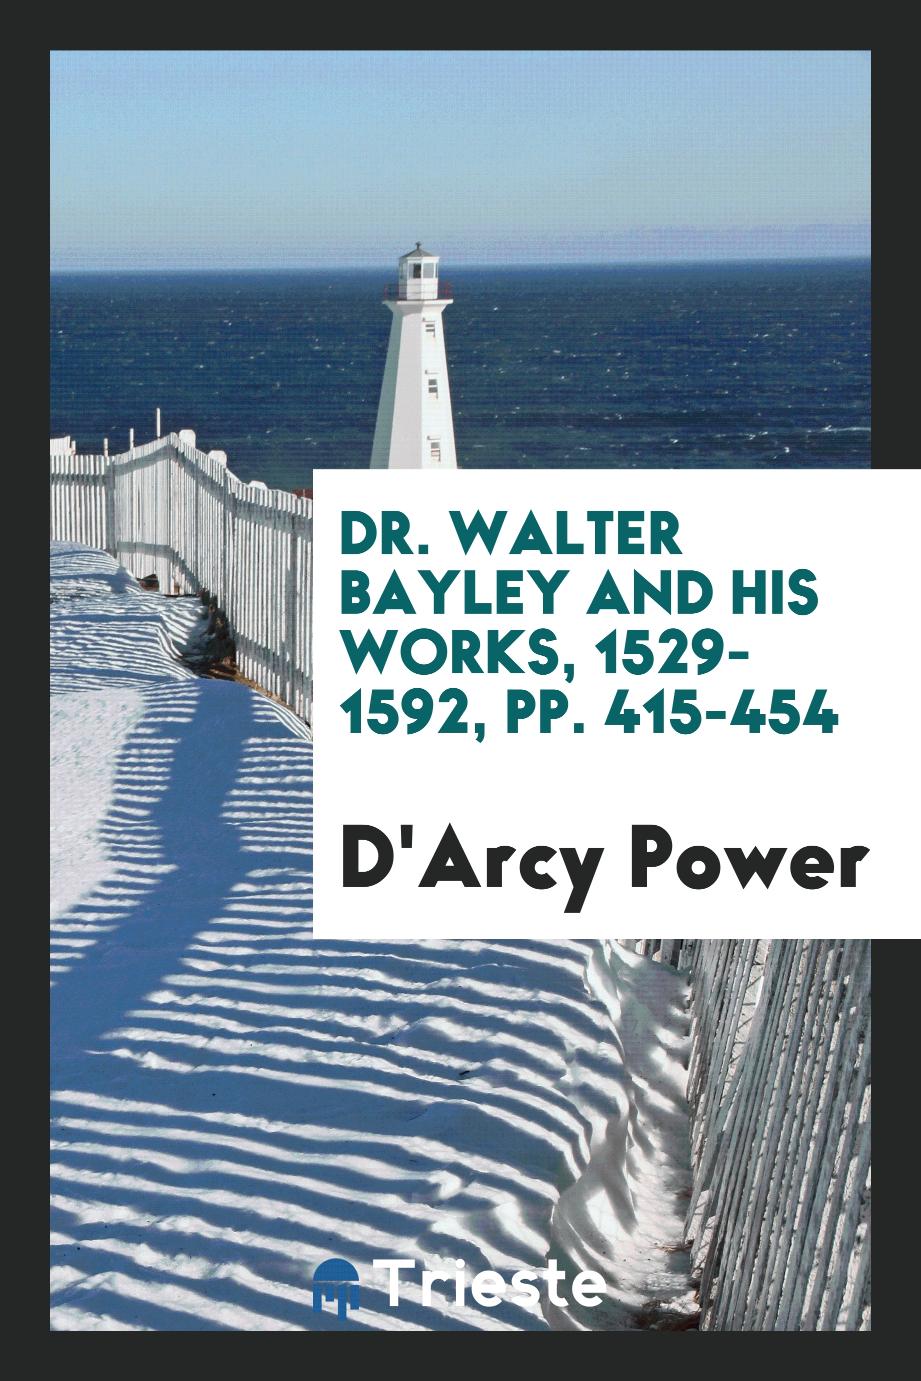 Dr. Walter Bayley and his works, 1529-1592, pp. 415-454